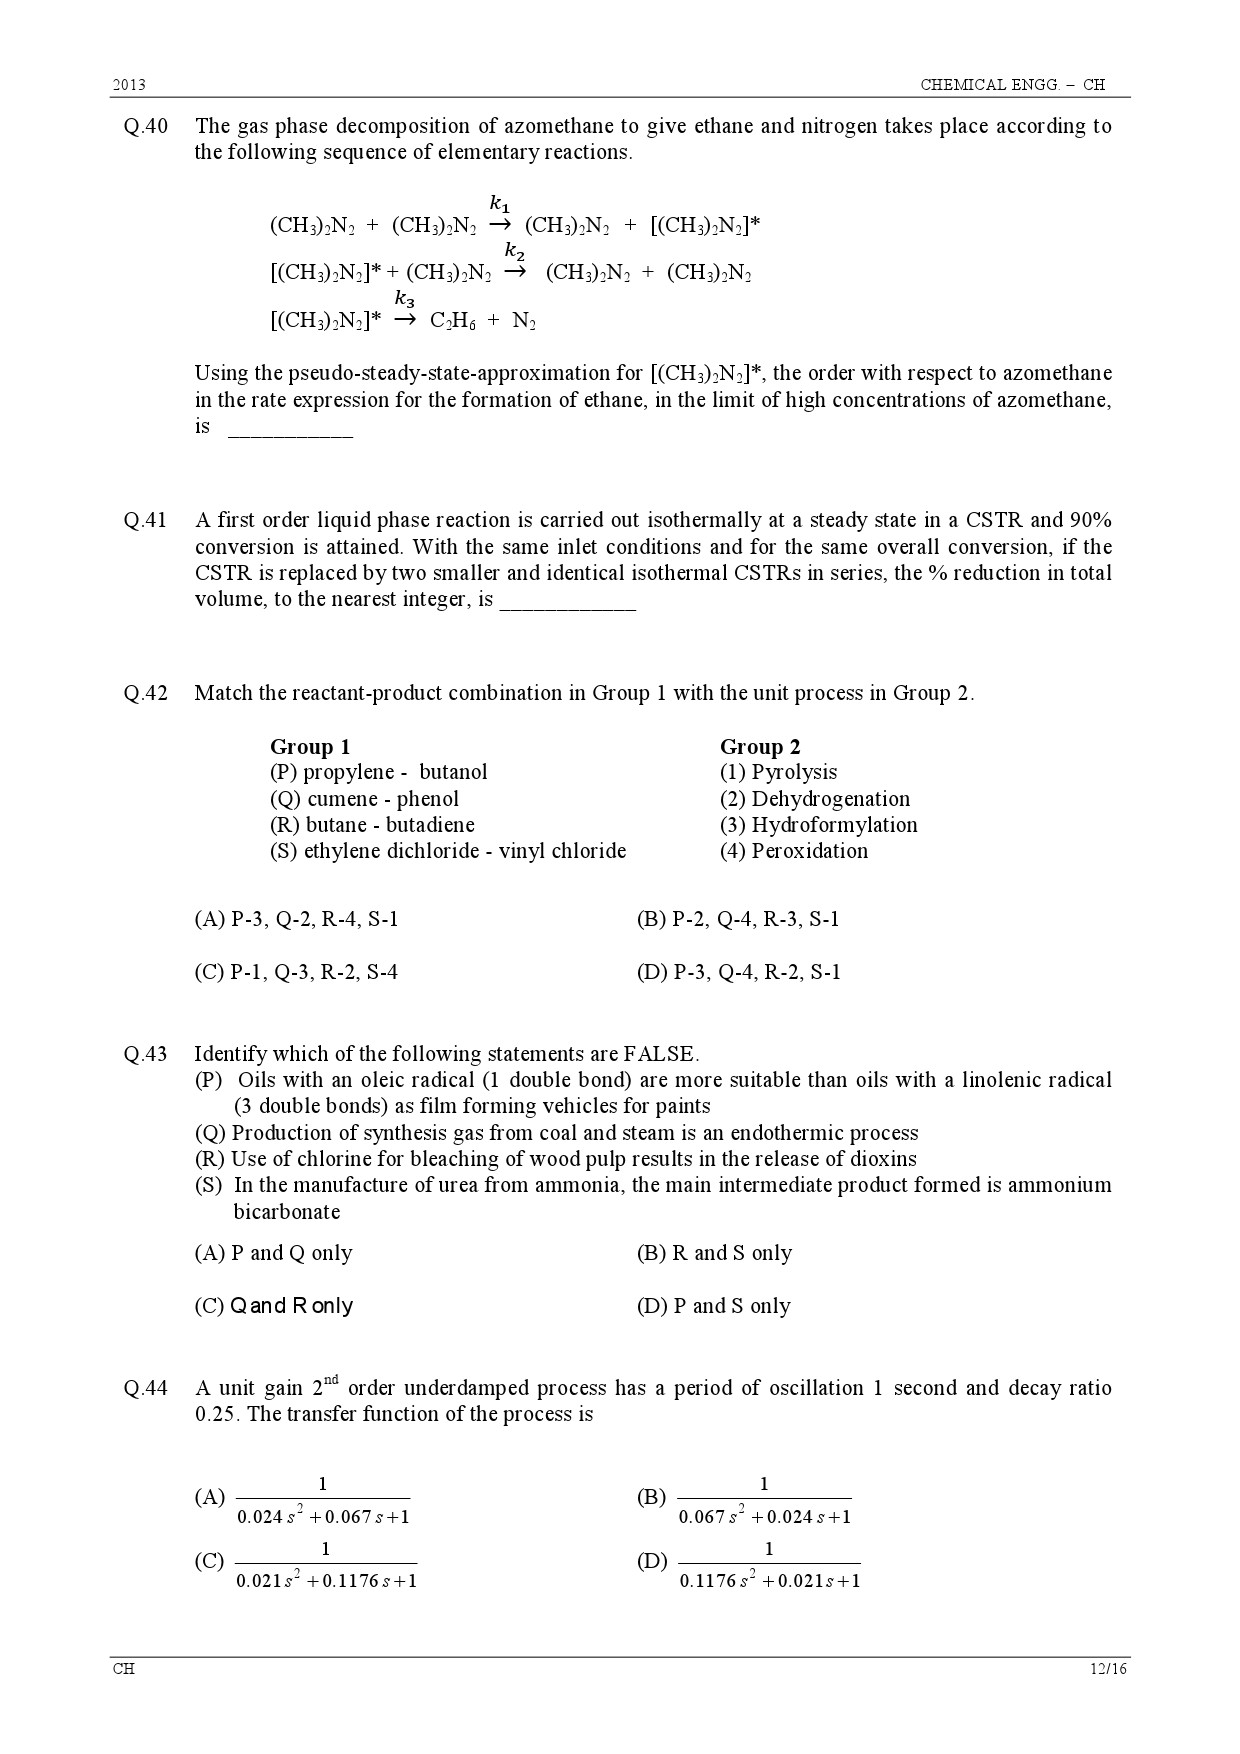 GATE Exam Question Paper 2013 Chemical Engineering 12